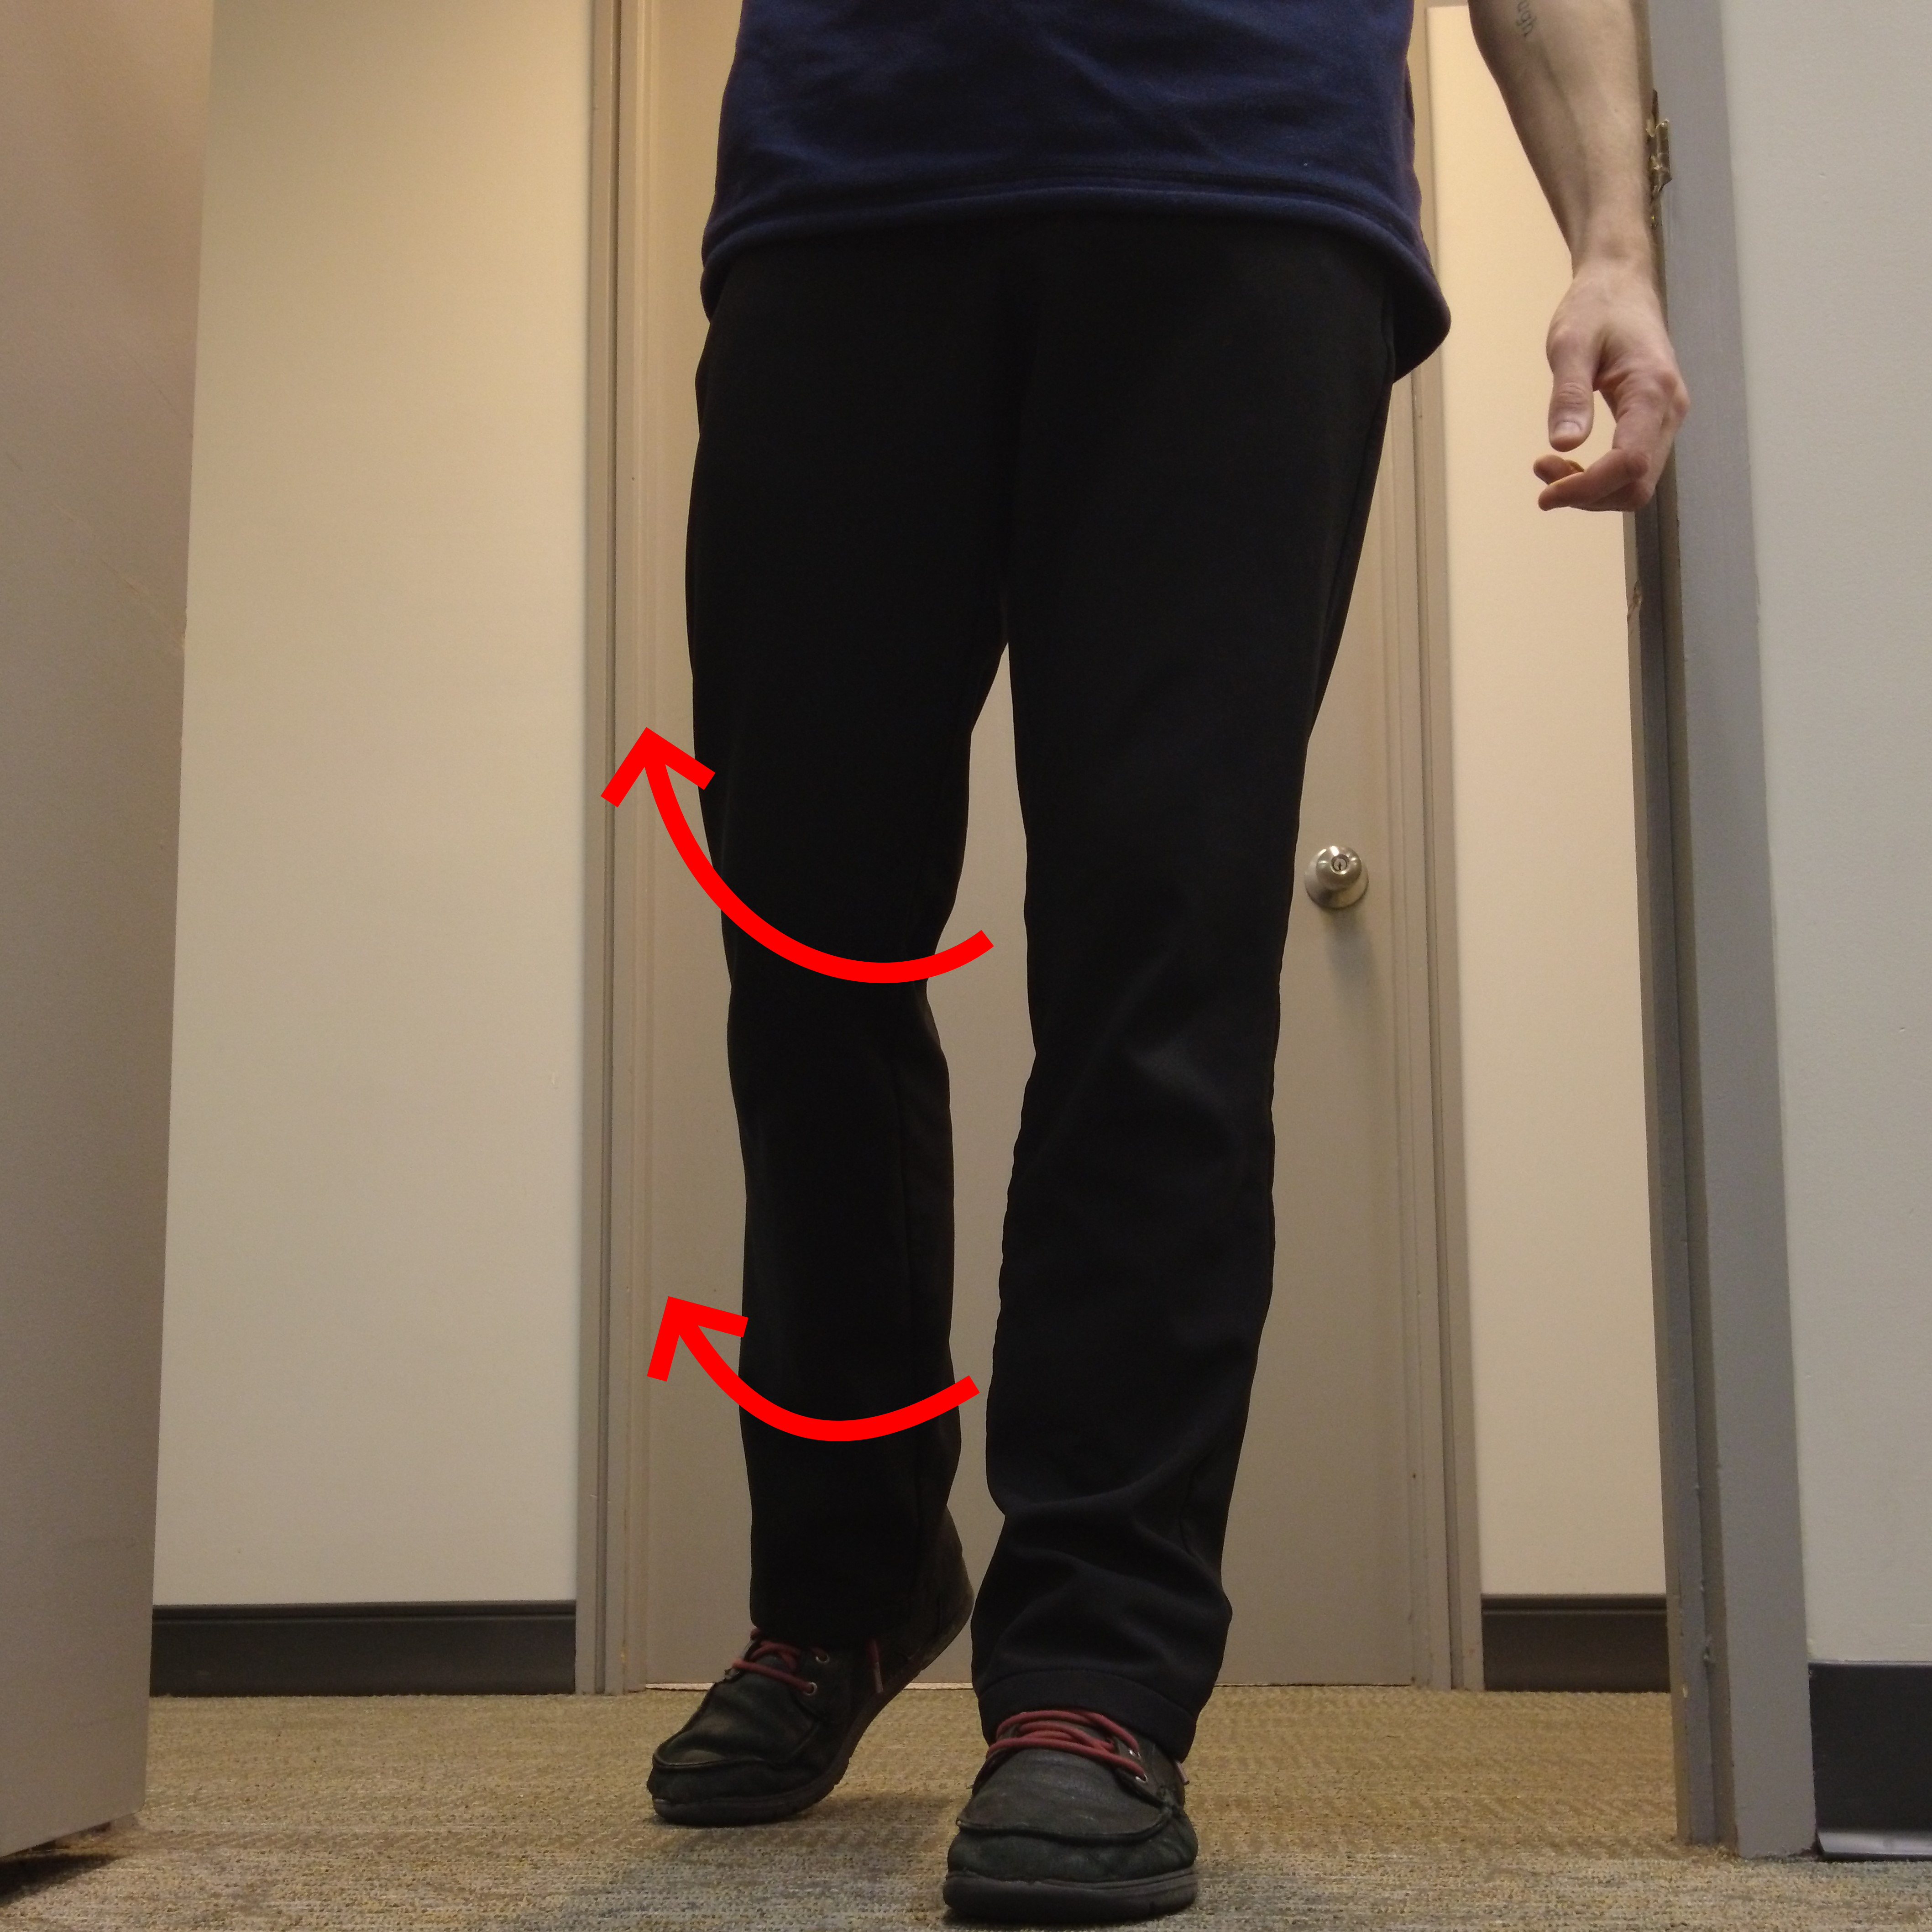 Man walking forwards with right leg rotating outwards